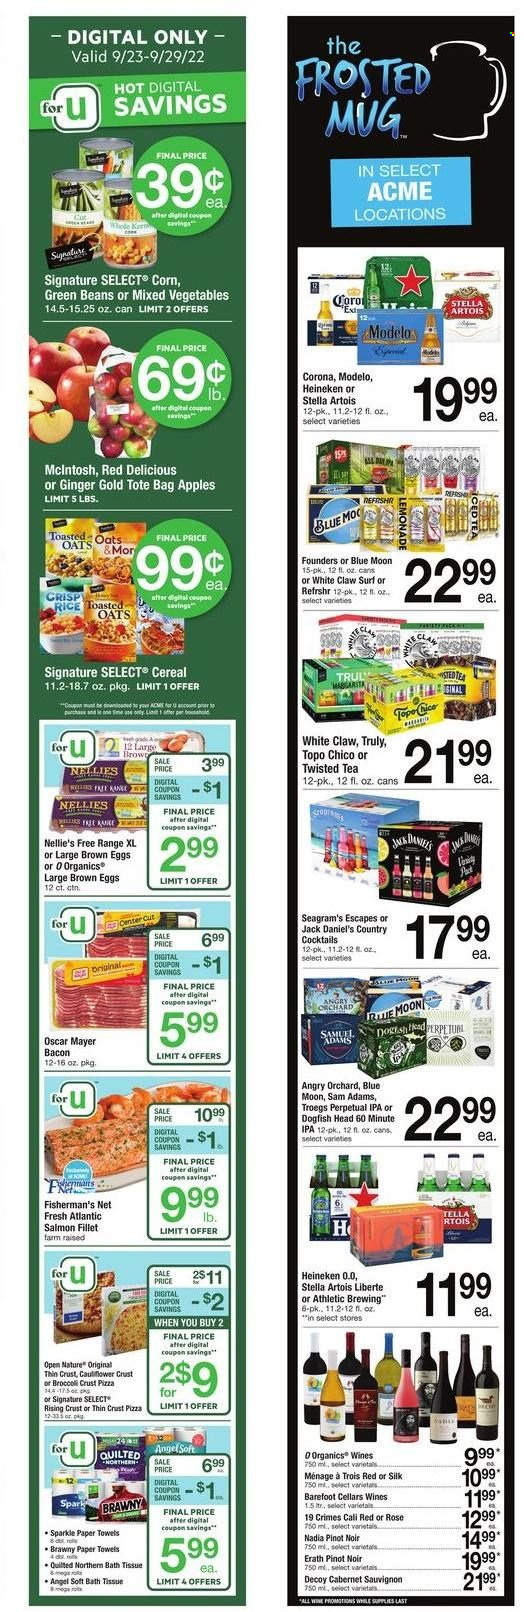 thumbnail - ACME Flyer - 09/23/2022 - 09/29/2022 - Sales products - beans, broccoli, corn, ginger, green beans, apples, Red Delicious apples, salmon, salmon fillet, Jack Daniel's, pizza, bacon, Oscar Mayer, Silk, eggs, mixed vegetables, cereals, toasted oats, rice, tea, Cabernet Sauvignon, red wine, wine, Pinot Noir, rosé wine, White Claw, TRULY, beer, Corona Extra, Heineken, IPA, Modelo, bath tissue, Quilted Northern, kitchen towels, paper towels, Surf, mug, tote, tote bag, Stella Artois, Blue Moon, Twisted Tea. Page 5.